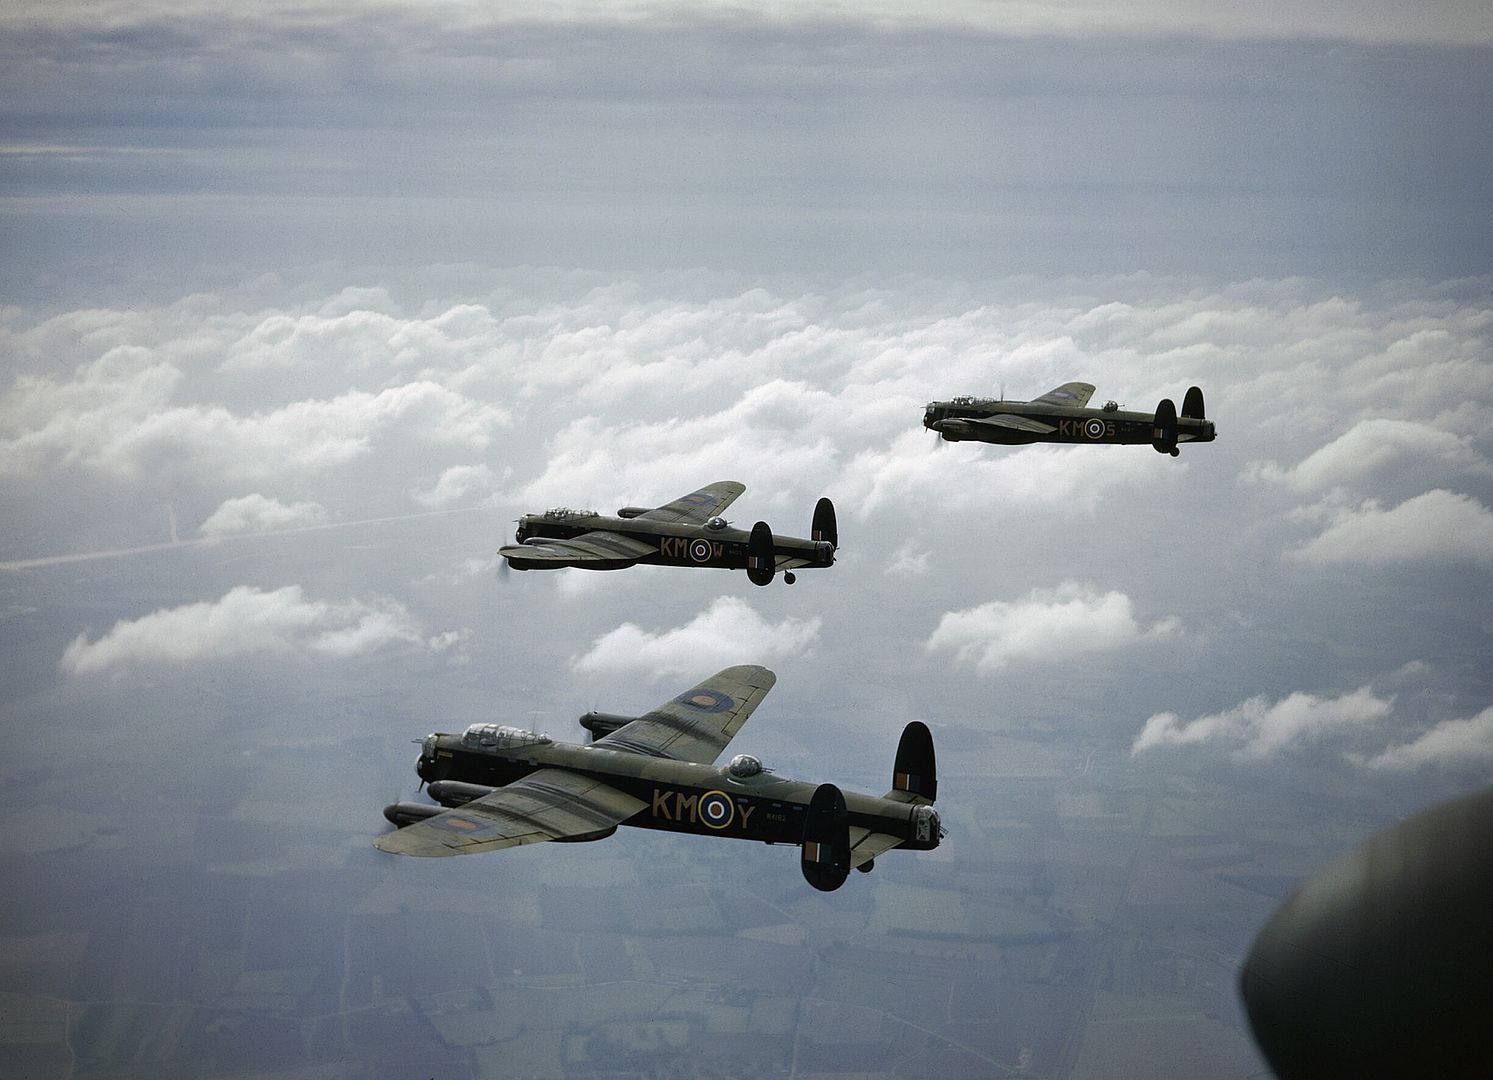 Lancaster B Mark Is Of No 44 Squadron Royal Air Force Based At Waddington Lincolnshire Flying Above The Clouds